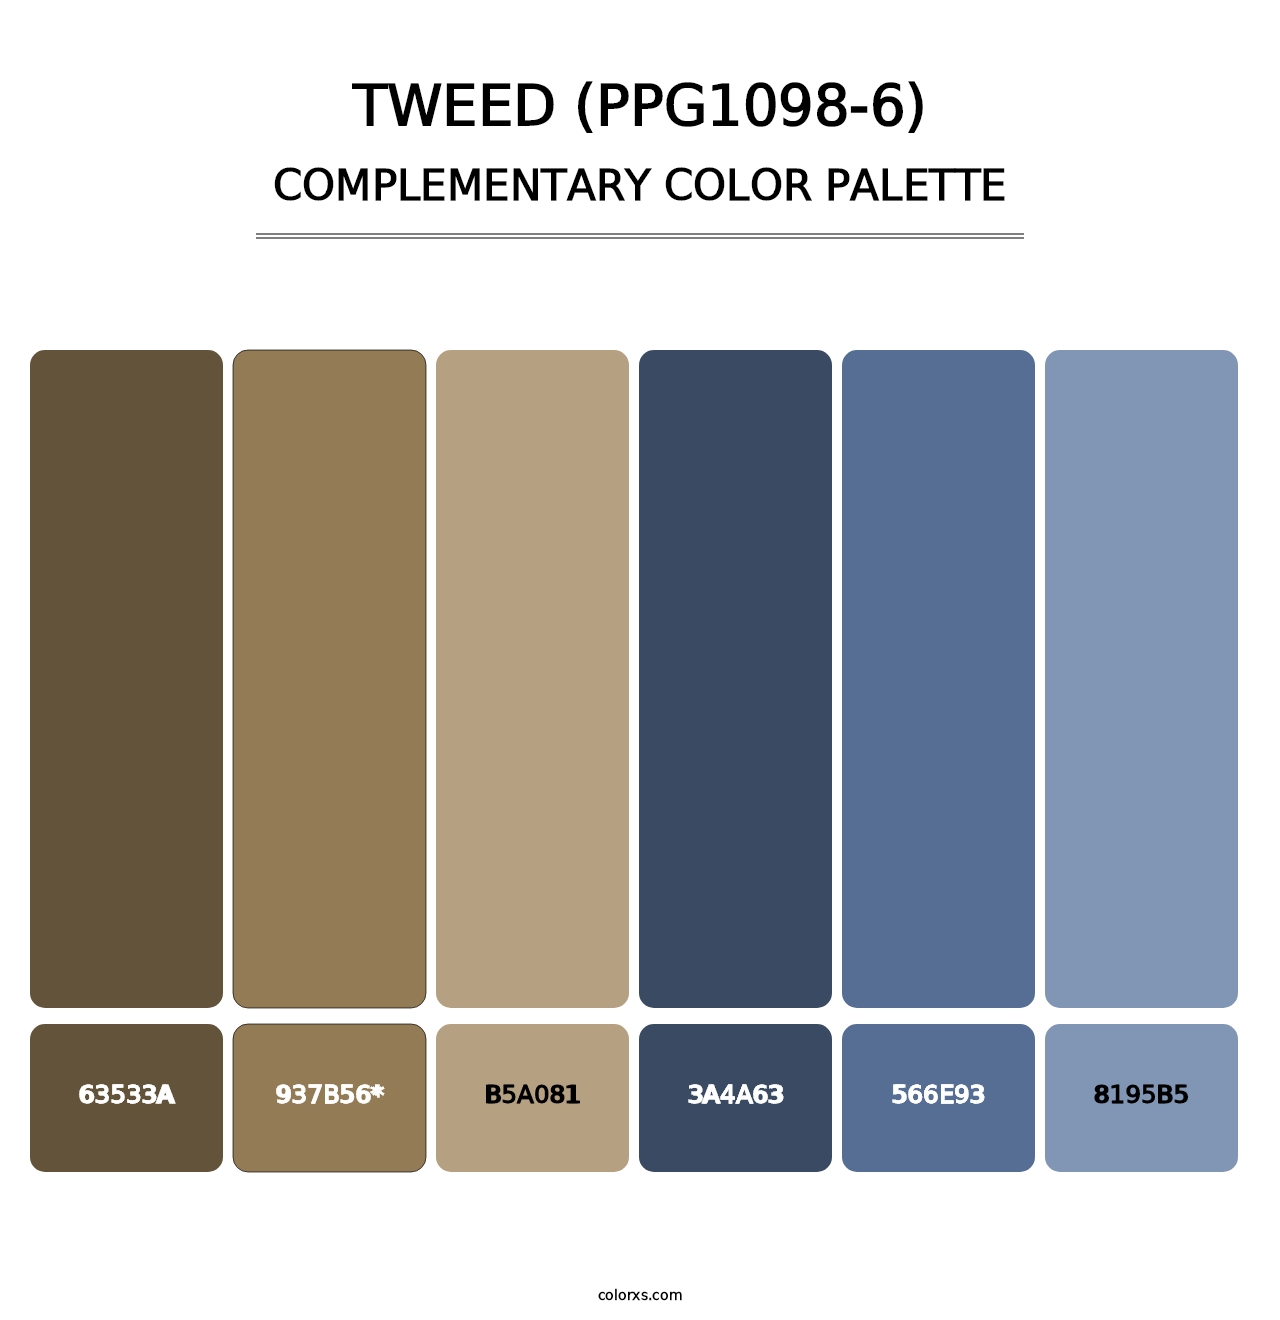 Tweed (PPG1098-6) - Complementary Color Palette